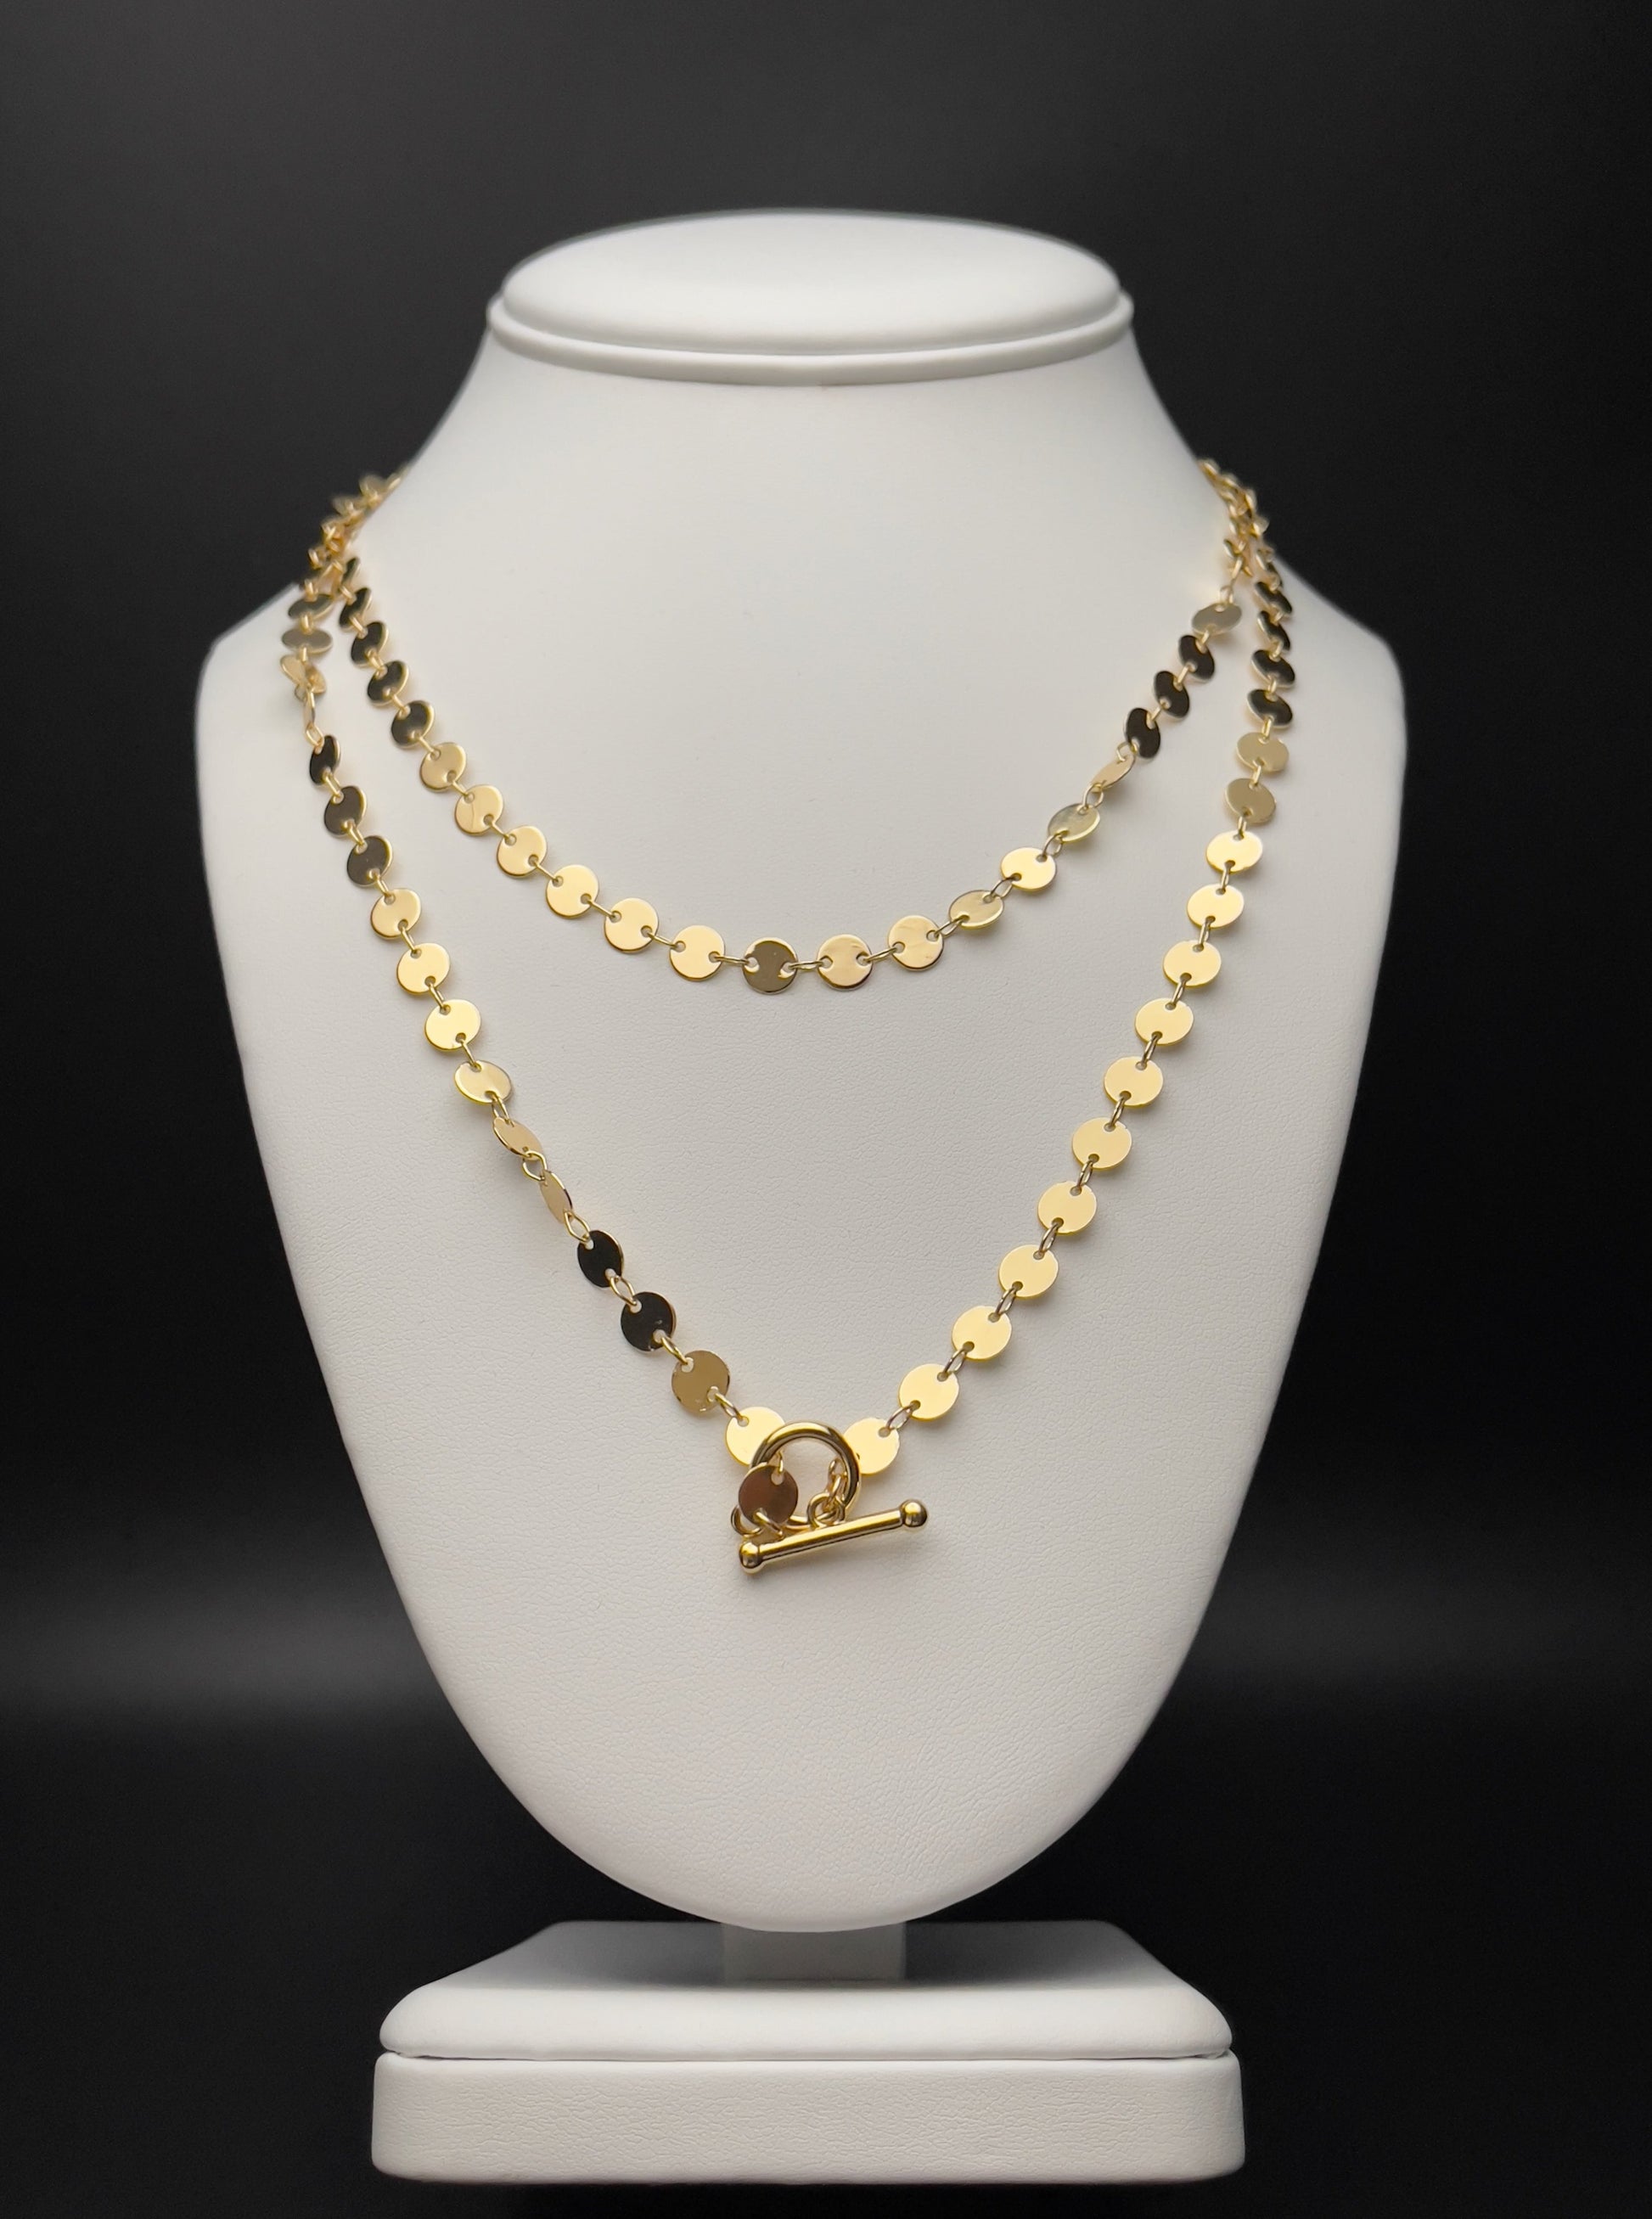 Image of necklace. Chain Length: 36 inches Chain Type: Polished disc Chain Thickness: 6 mm Clasp: Toggle  Chain: 14k Gold-plated